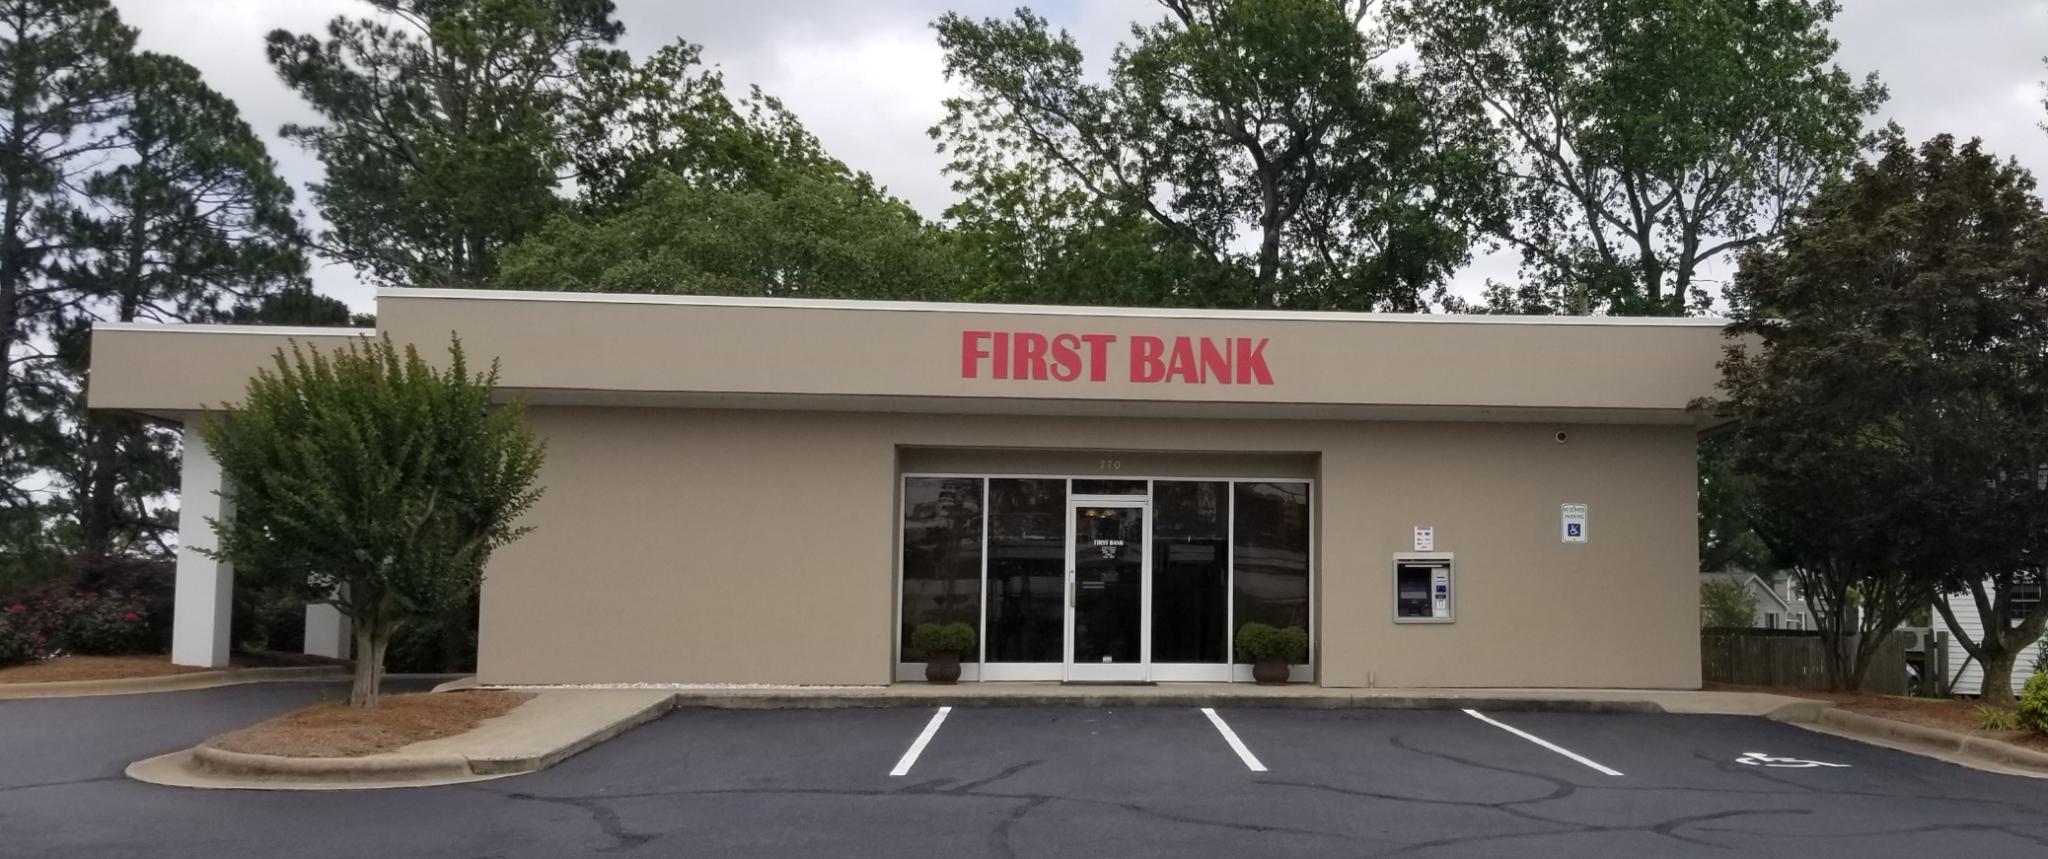 Come visit Bridget Jefferson at the First Bank Belhaven branch. She and her team will provide expert financial advice, flexible rates, business solutions, and convenient mobile options.